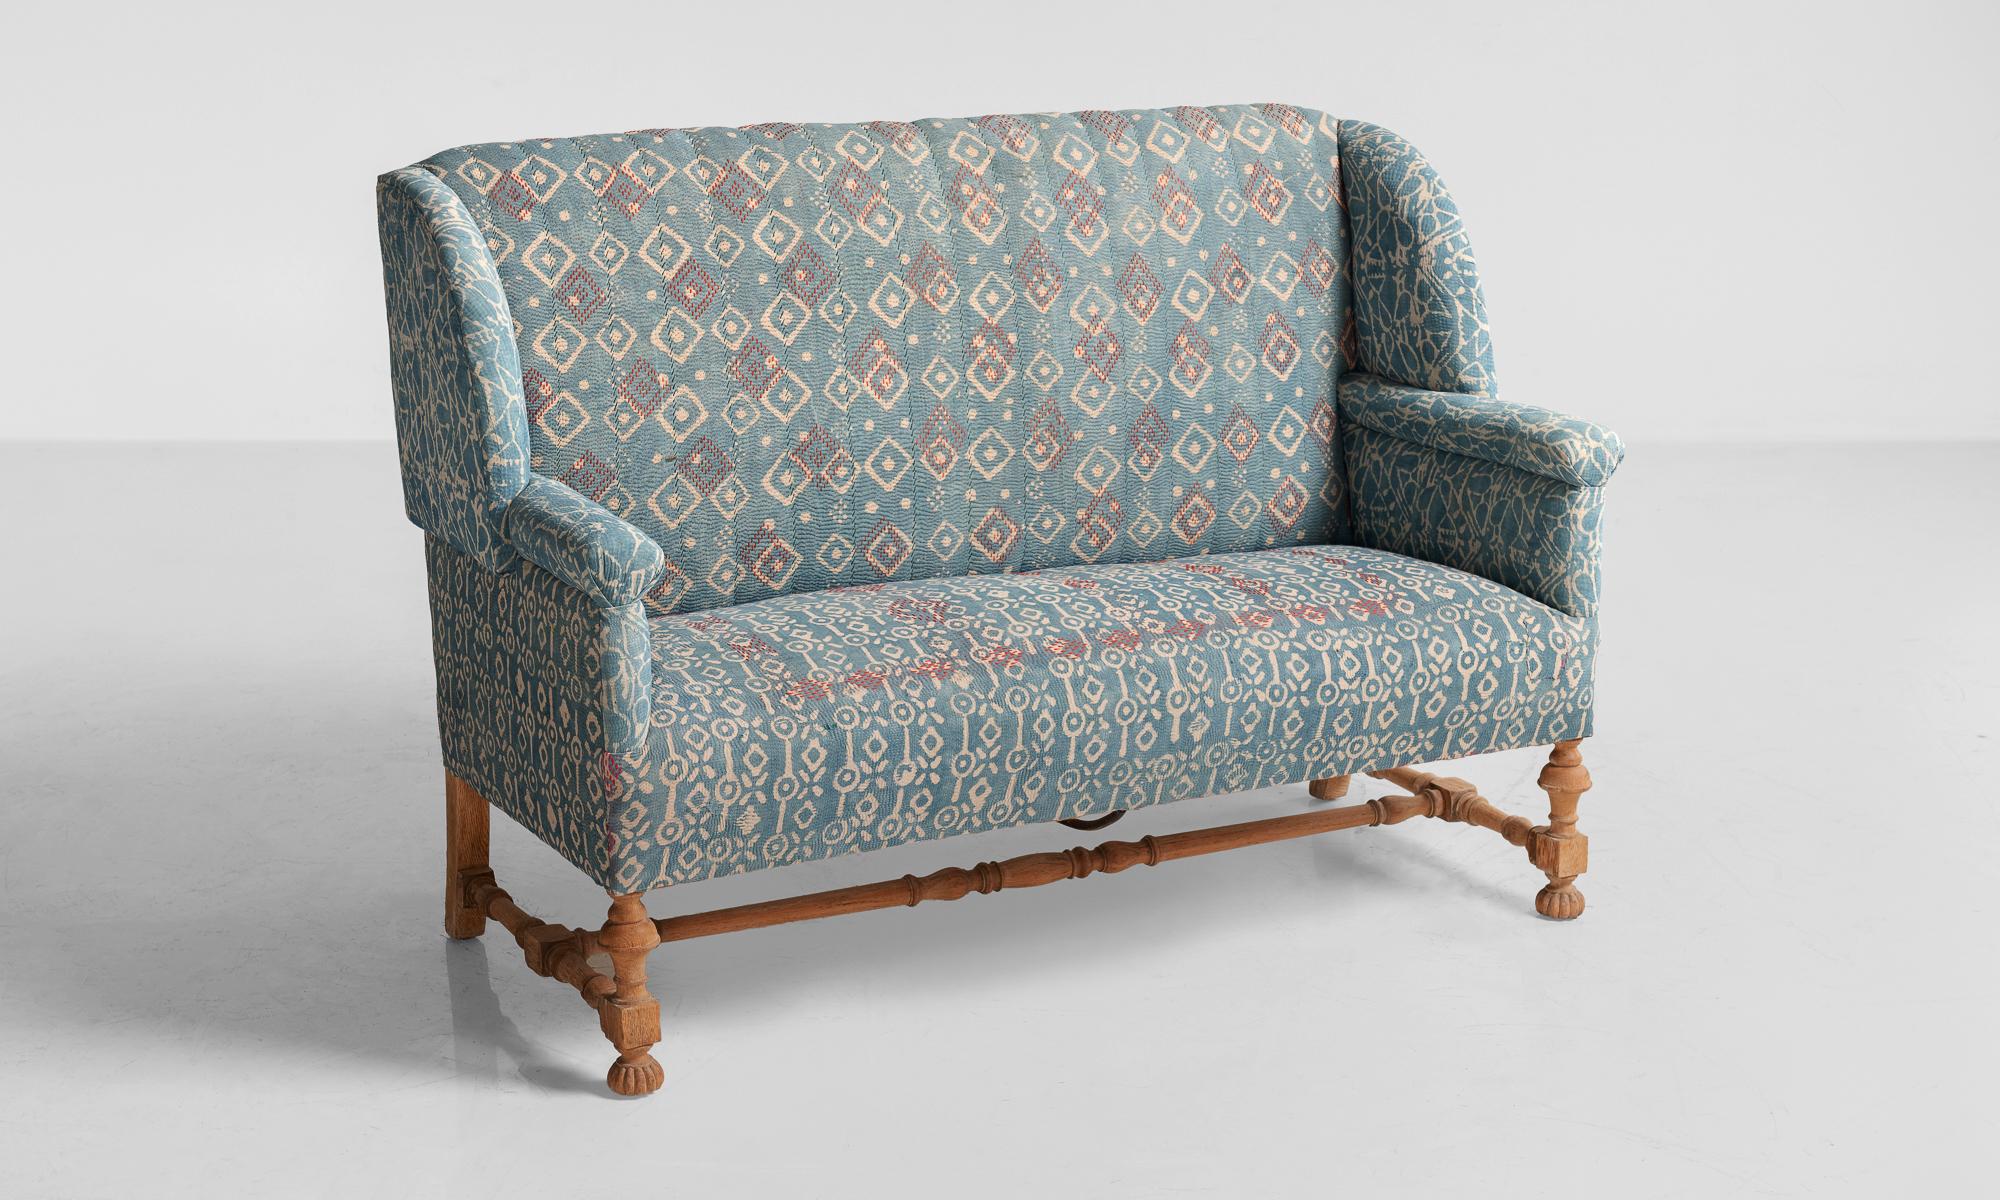 Indigo Quilt sofa, England, circa 1930.

Oak frame in the Arts & Crafts style, newly upholstered in vintage Indigo Quilt. Originally retailed by Liberty of London

Measures: 57